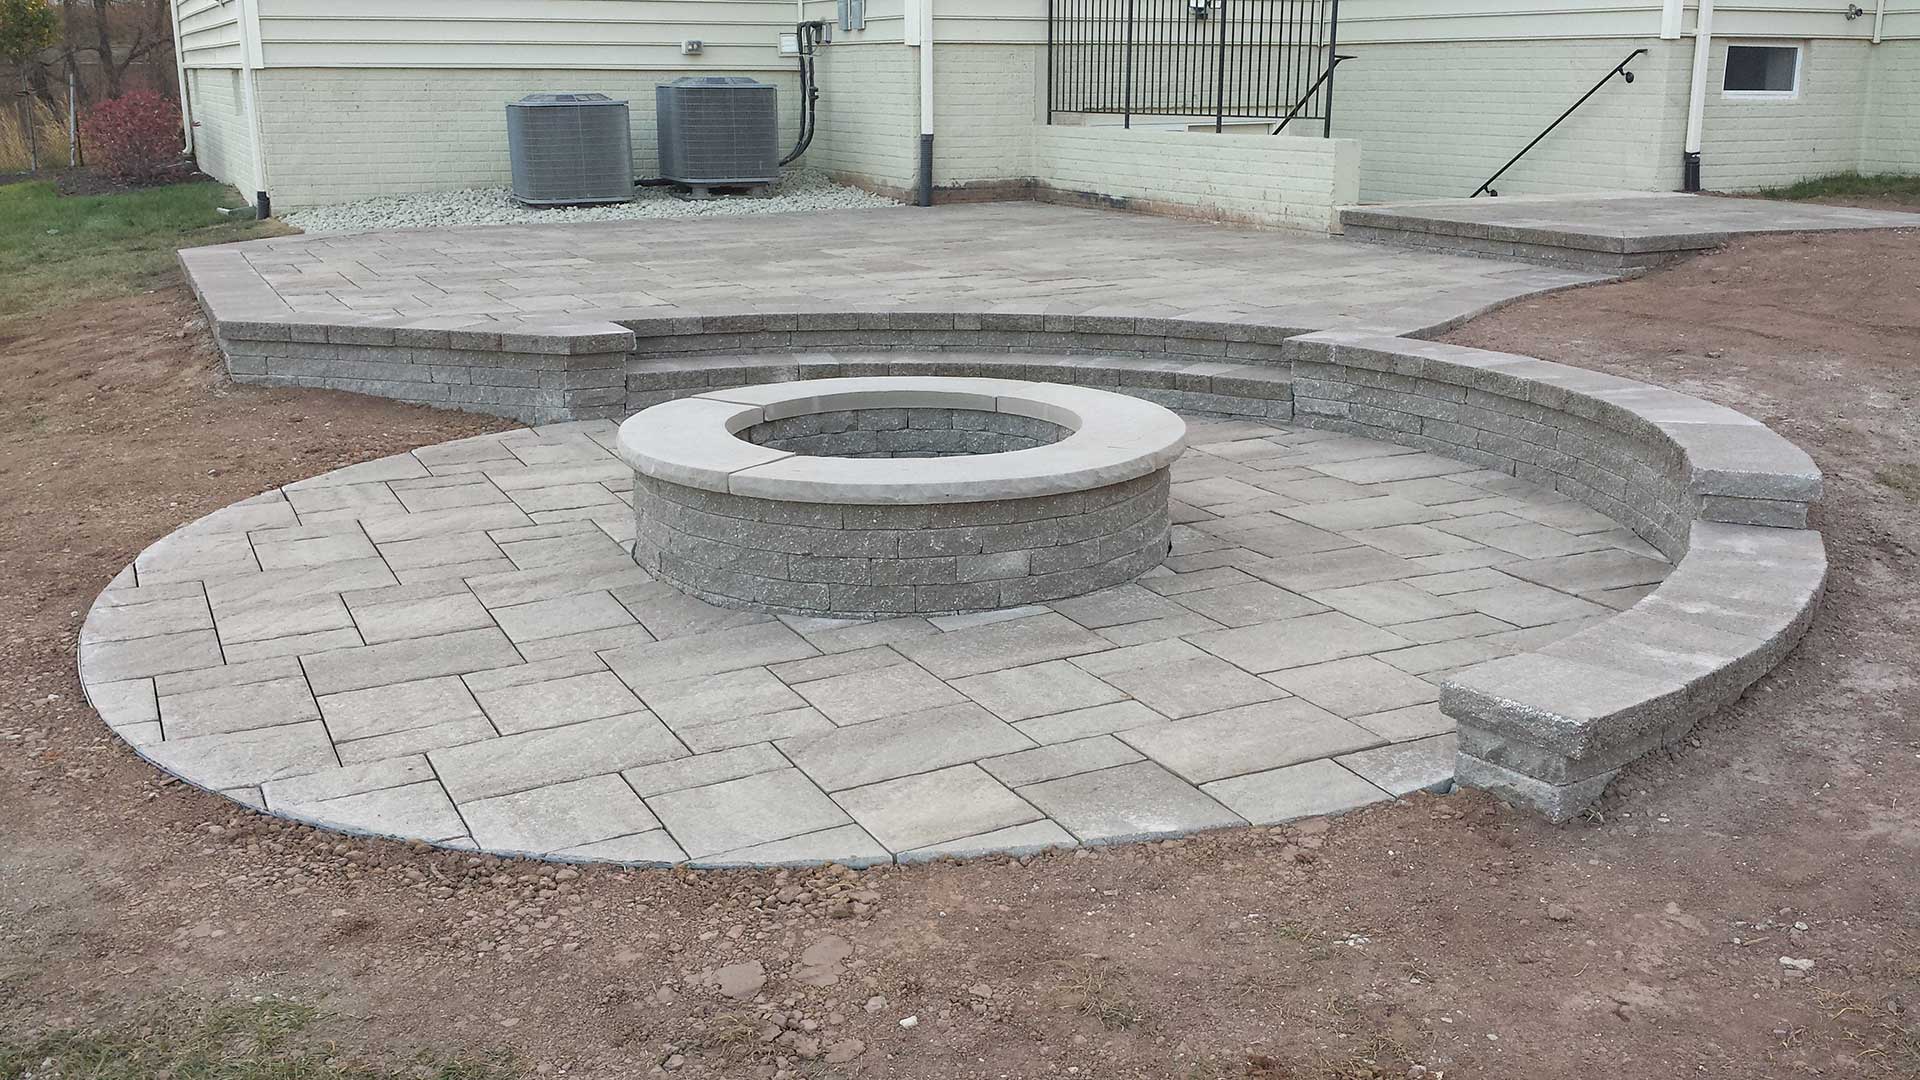 New fire pit installation at a Bristow, VA home property.